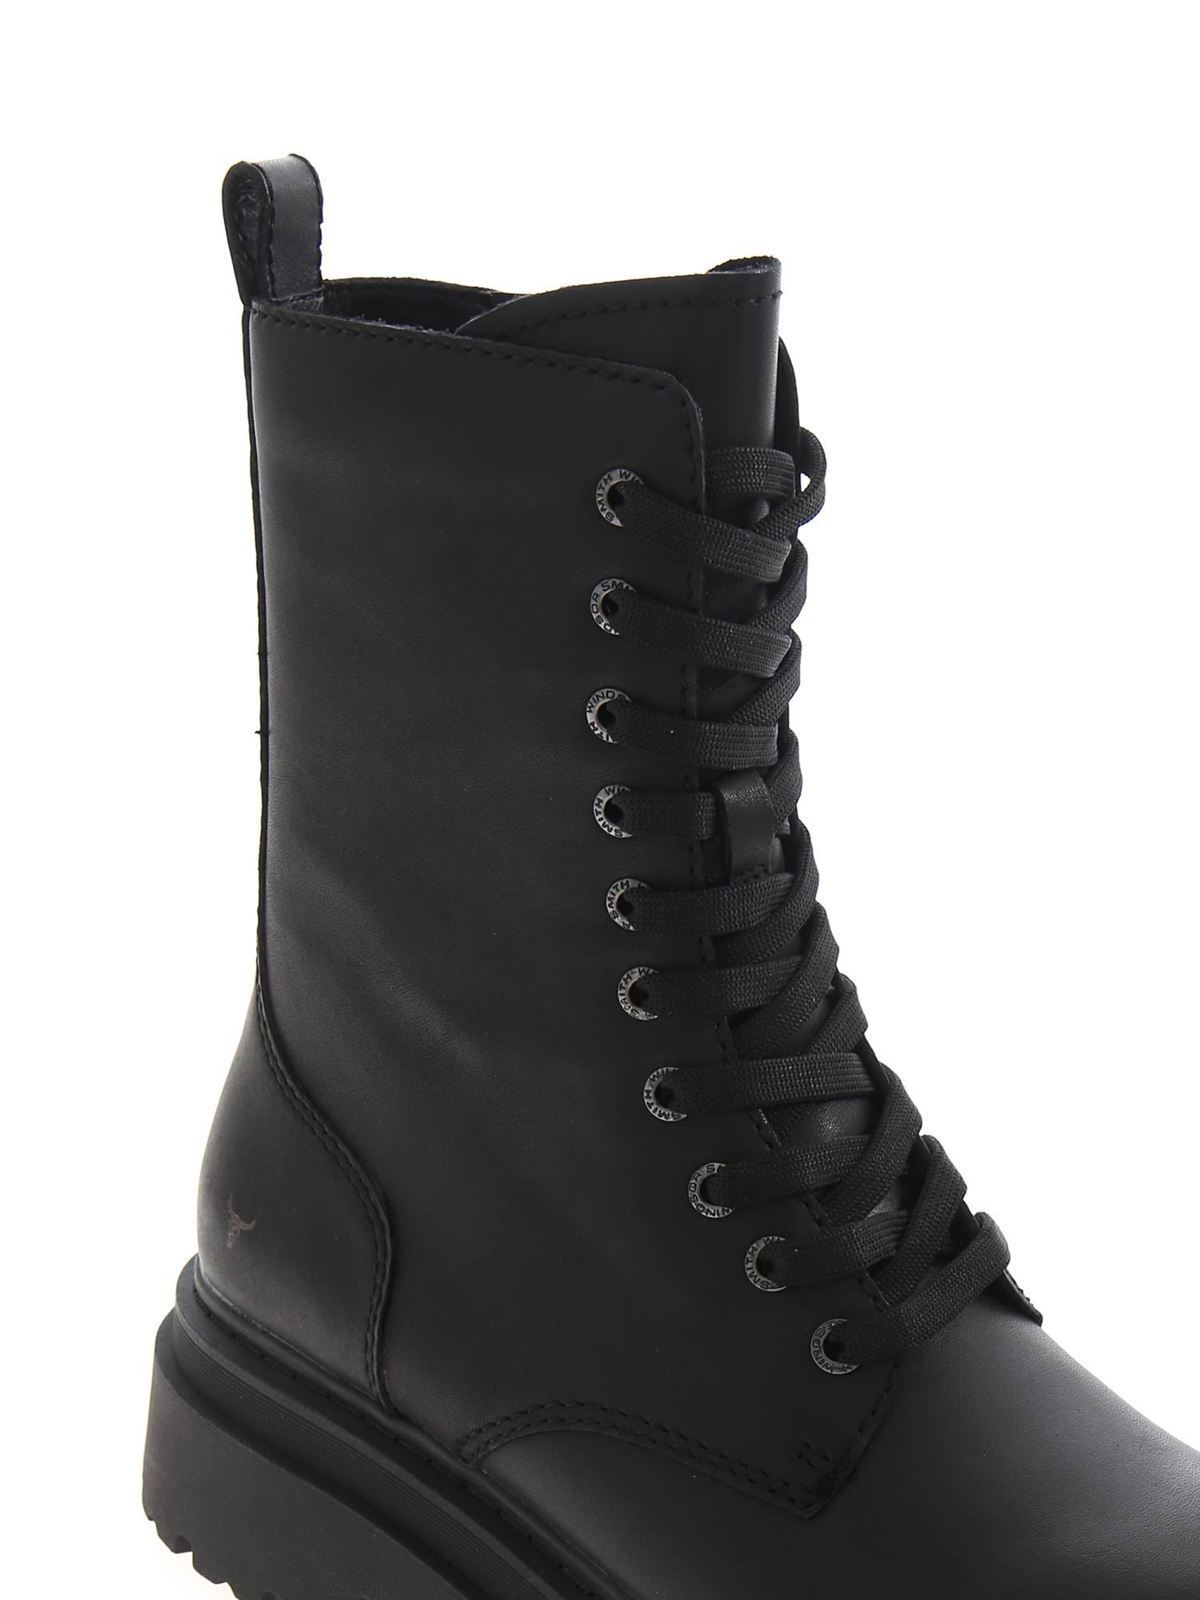 Ankle boots Windsor Smith - Payback ankle boots in black - PAYBACKBLKLEATHE